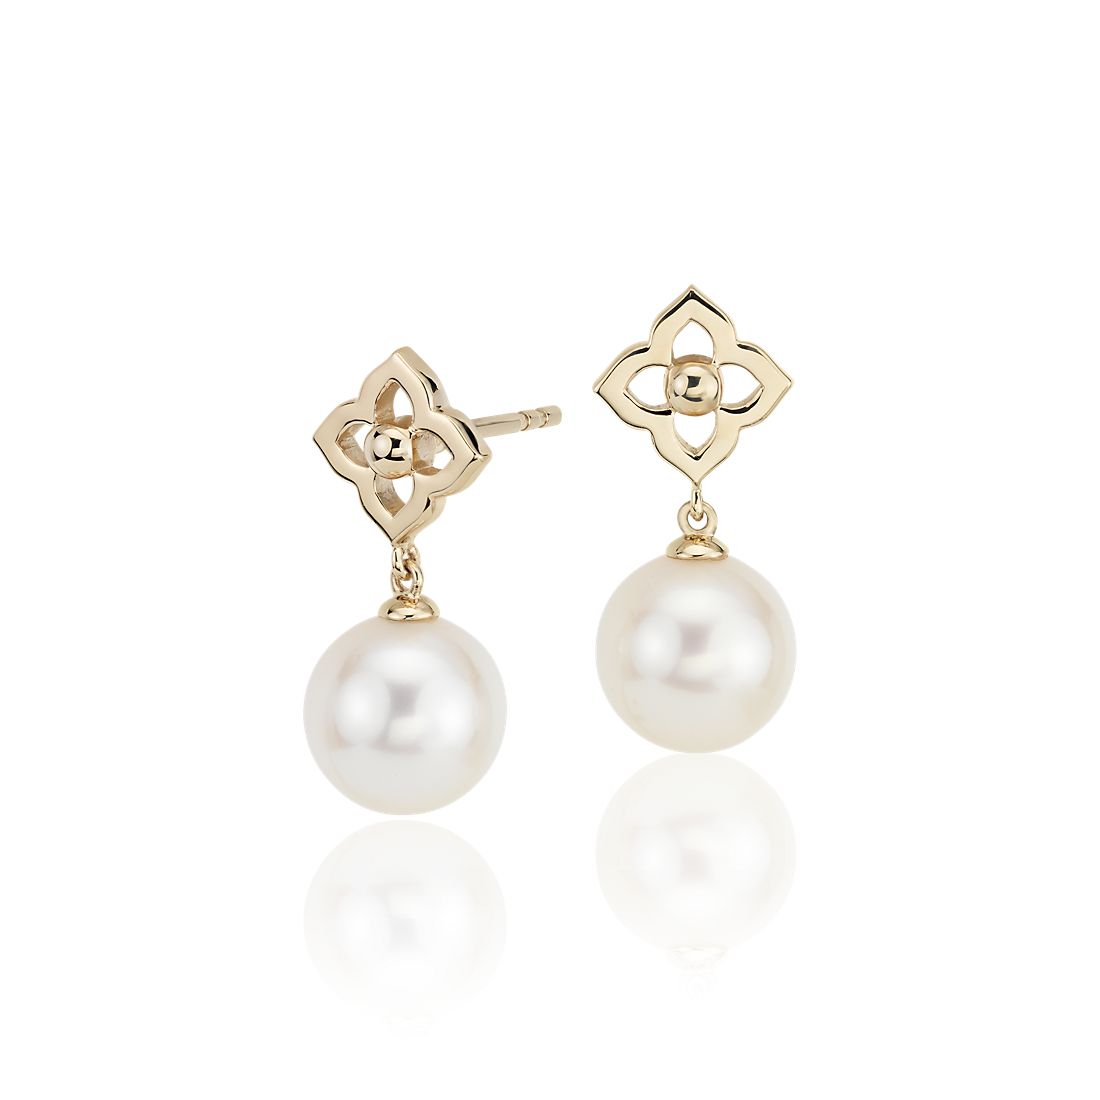 Freshwater Cultured Pearl Floral Drop Earrings in 14k Yellow Gold (8-8.5mm)